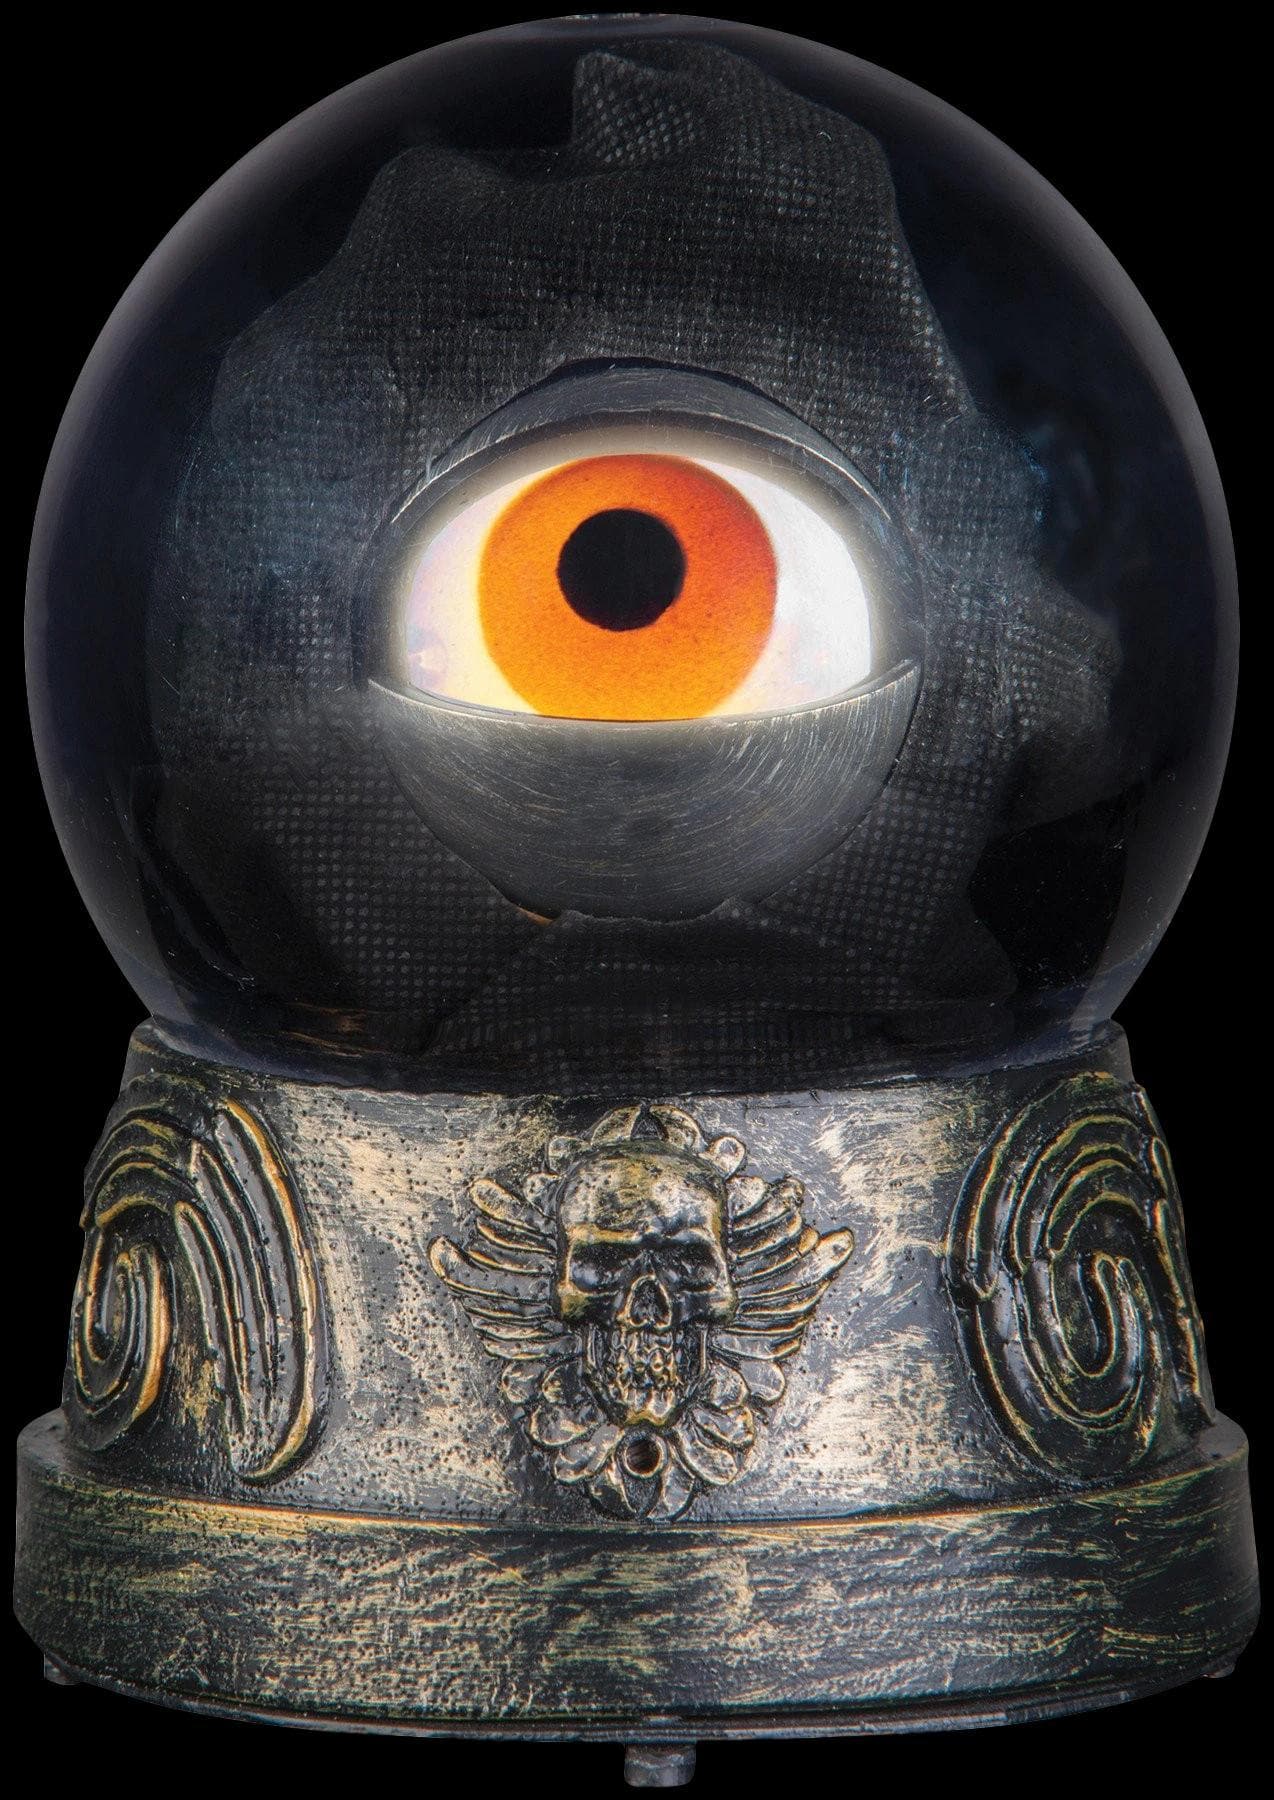 Eyeball Crystal Ball Animated Haunted House Prop The Horror Dome